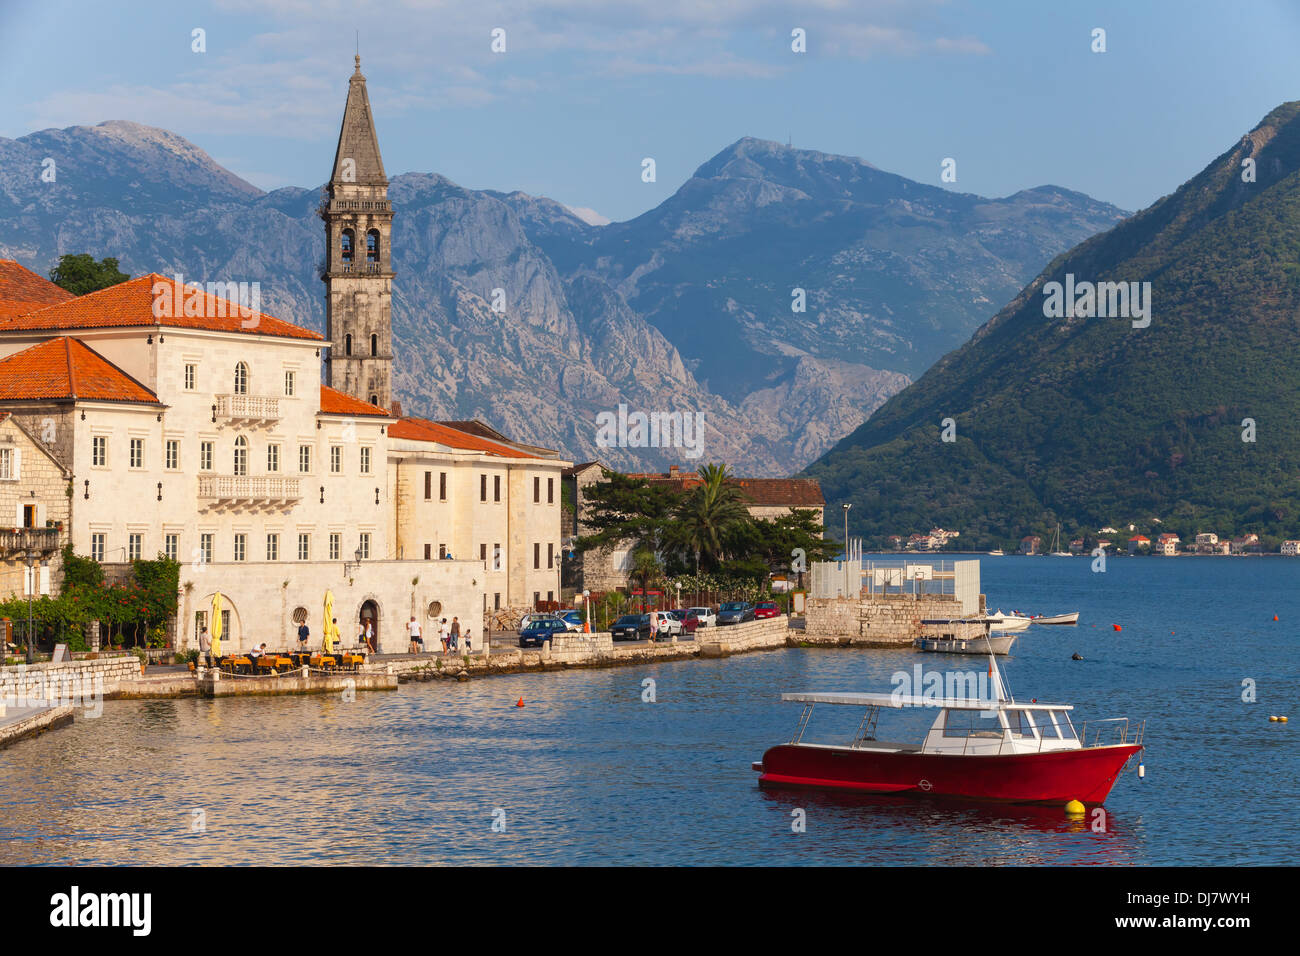 Landscape of old town Perast in Kotor bay, Montenegro Stock Photo